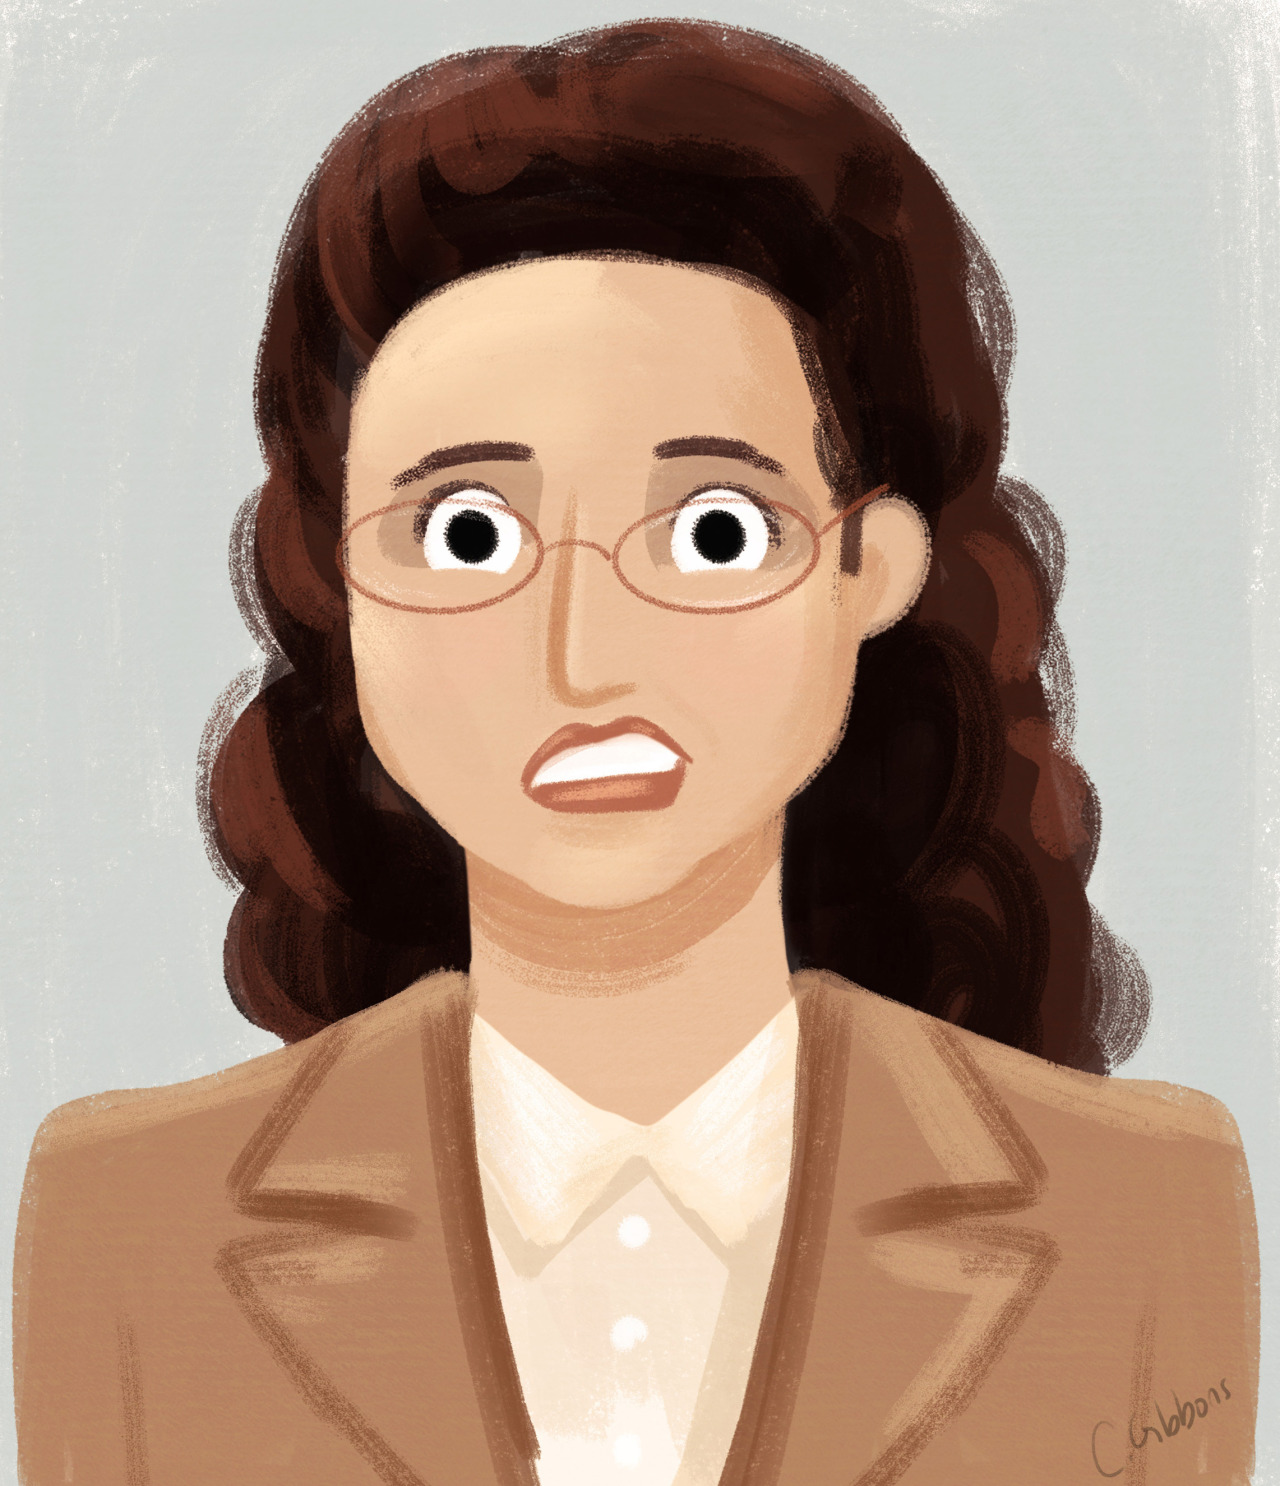 A drawing of one of my favorite TV show characters. Elaine is a total badass.
-Cassandra GIbbons